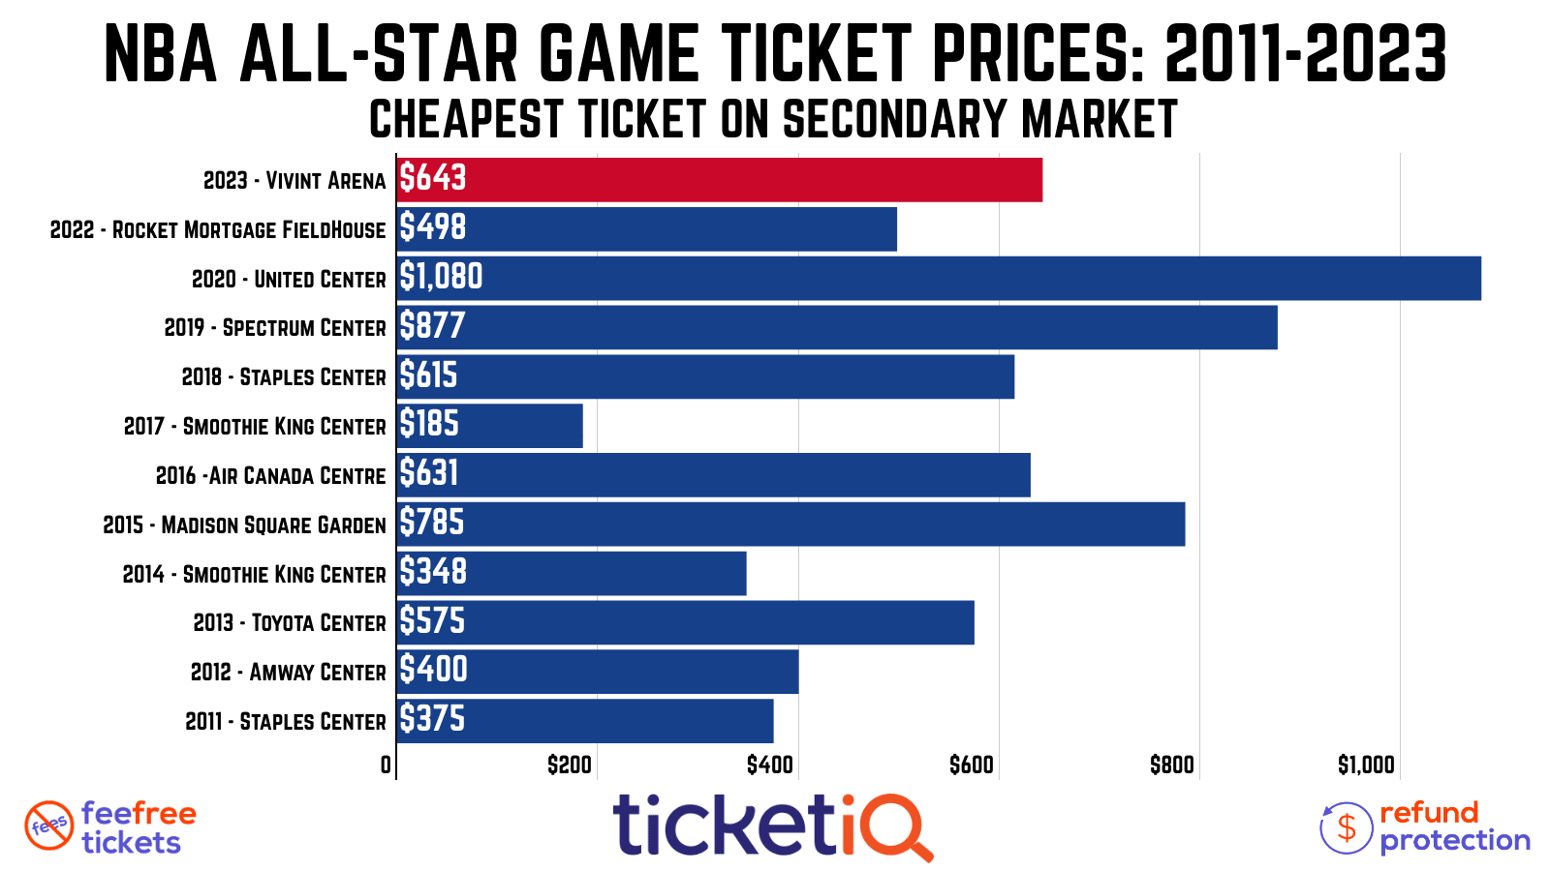 How To Find The Cheapest 2023 NBA AllStar Game Tickets